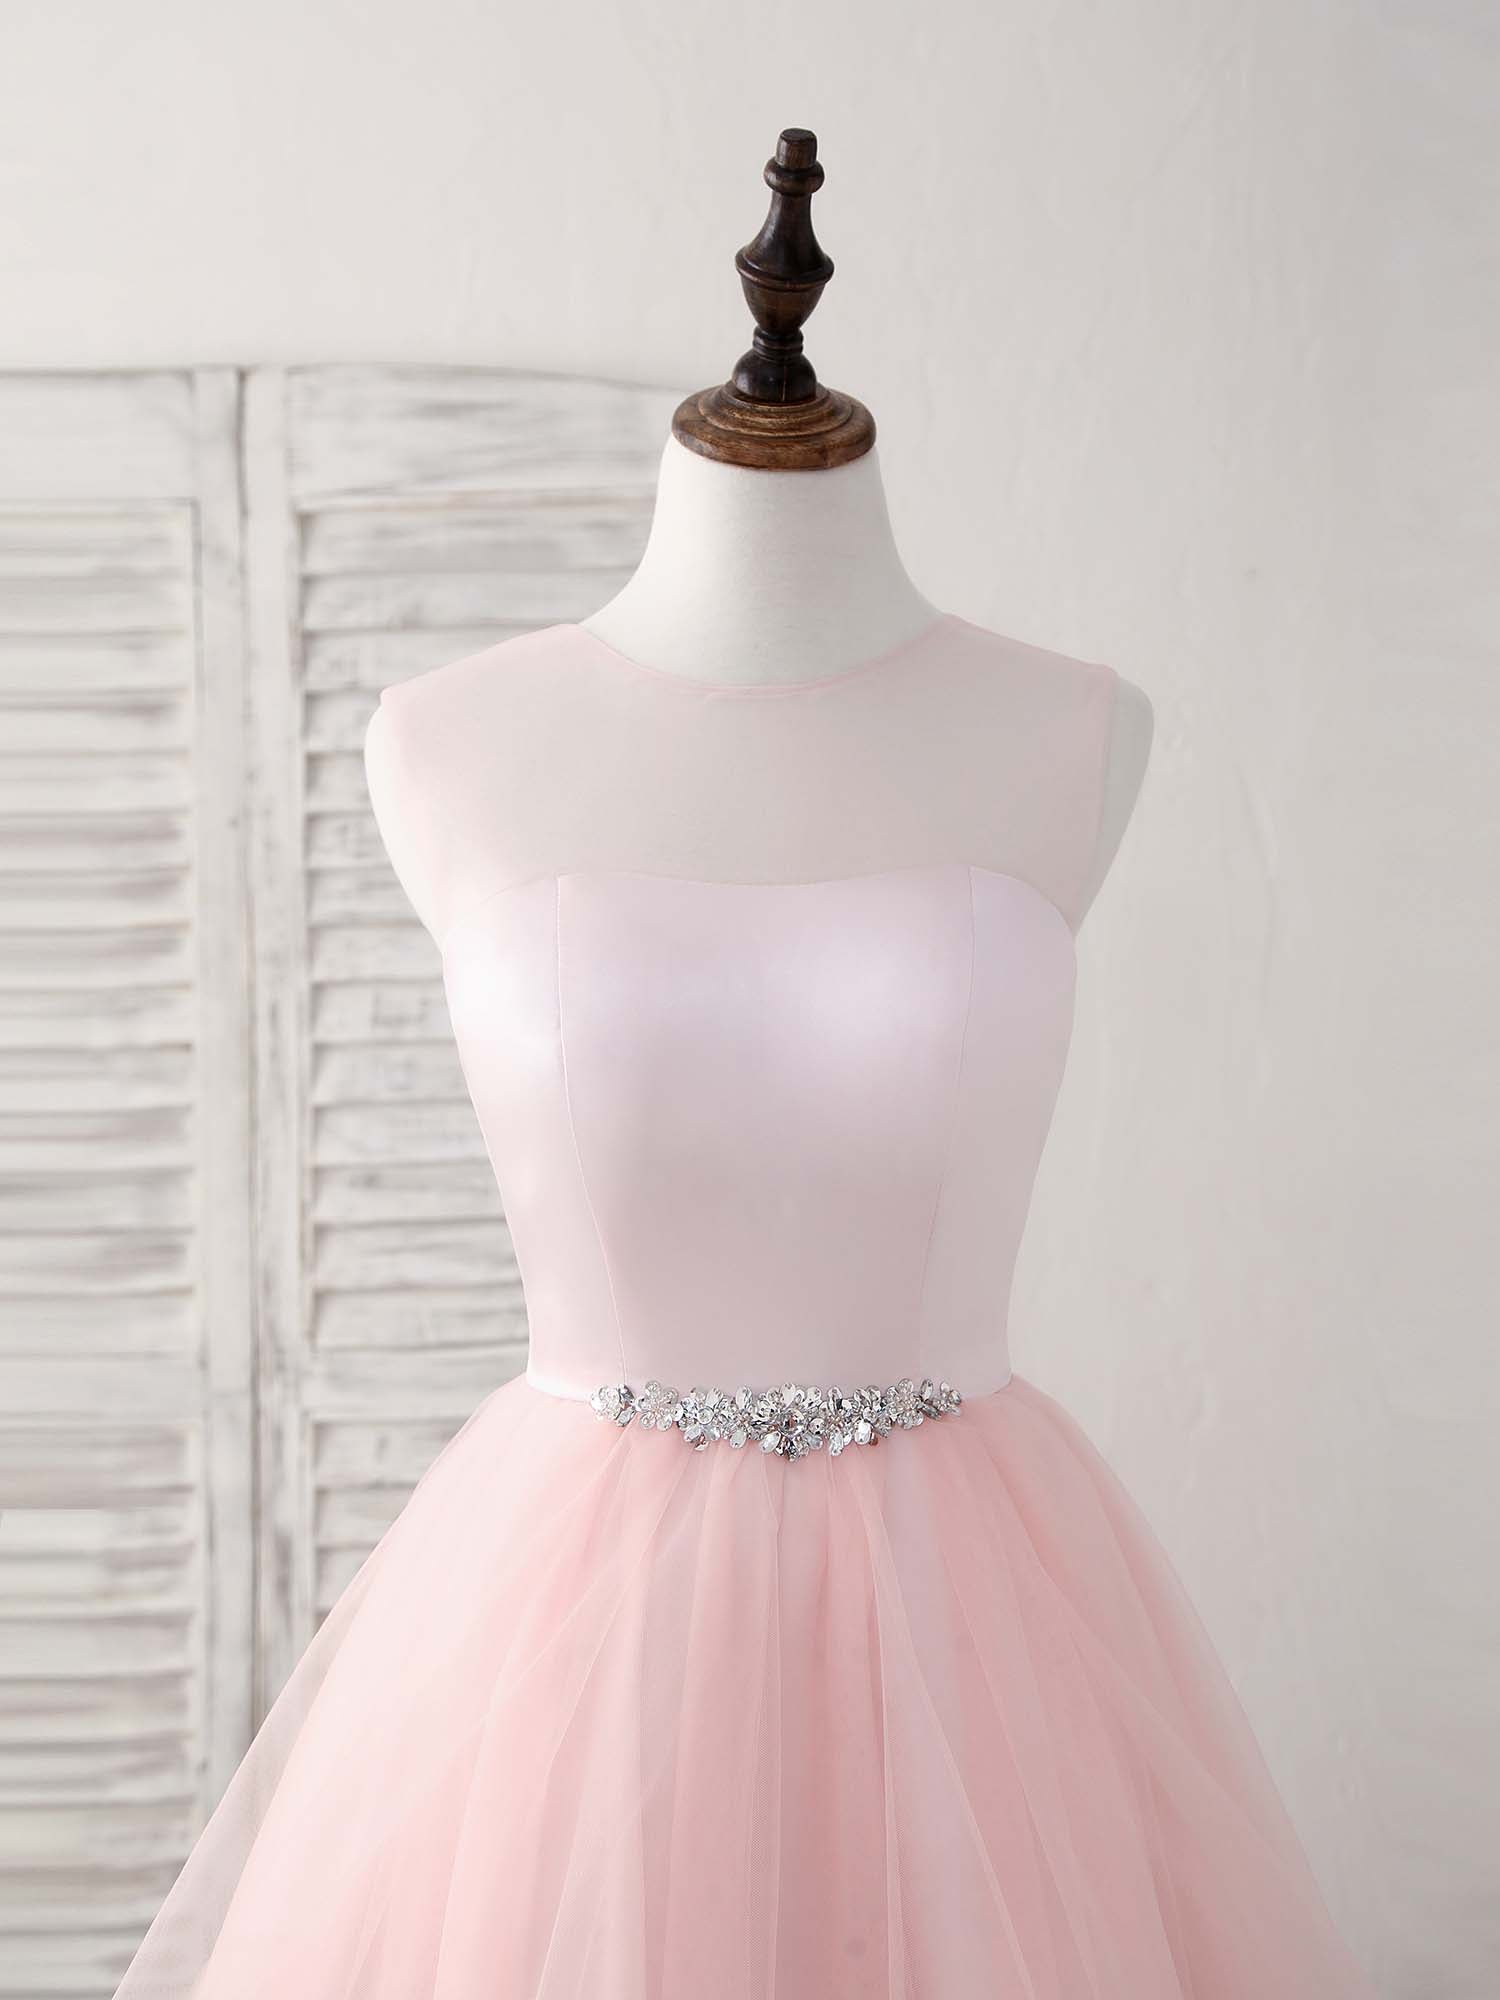 Yellow Dress, Pink Round Neck Tulle Pink Short Prom Dress Pink Homecoming Dress